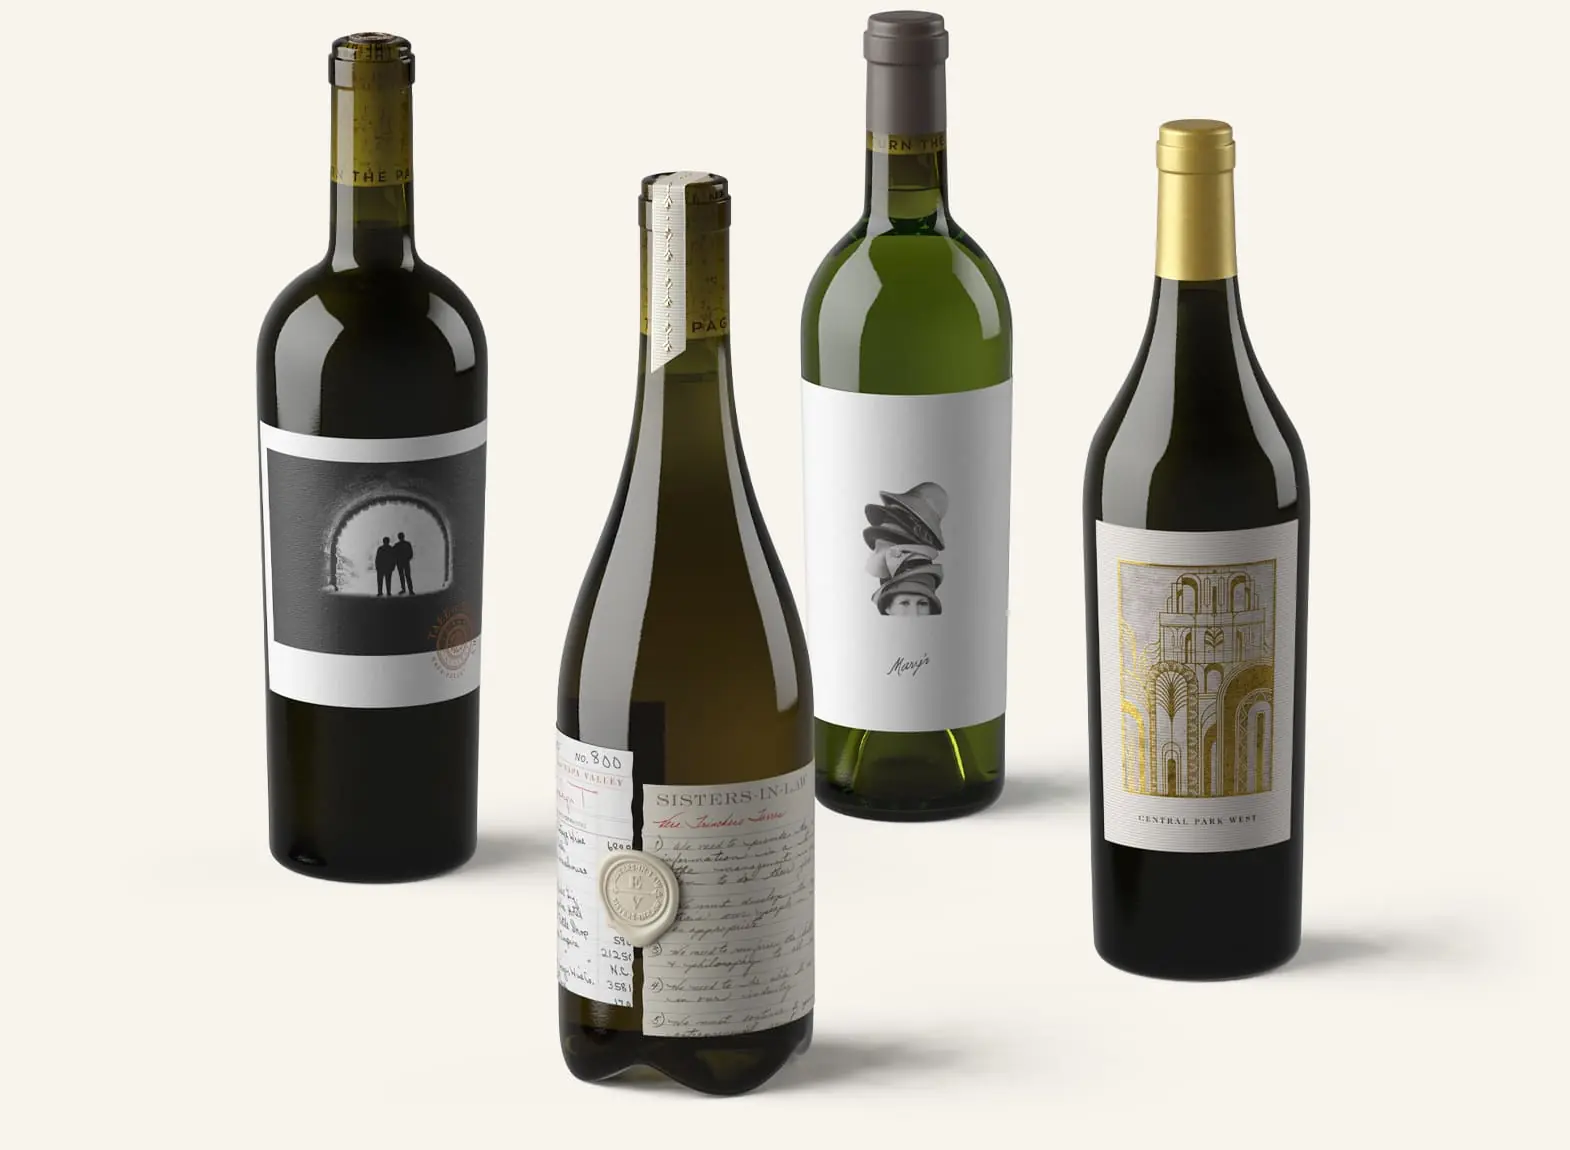 A group of wine bottles on a white background